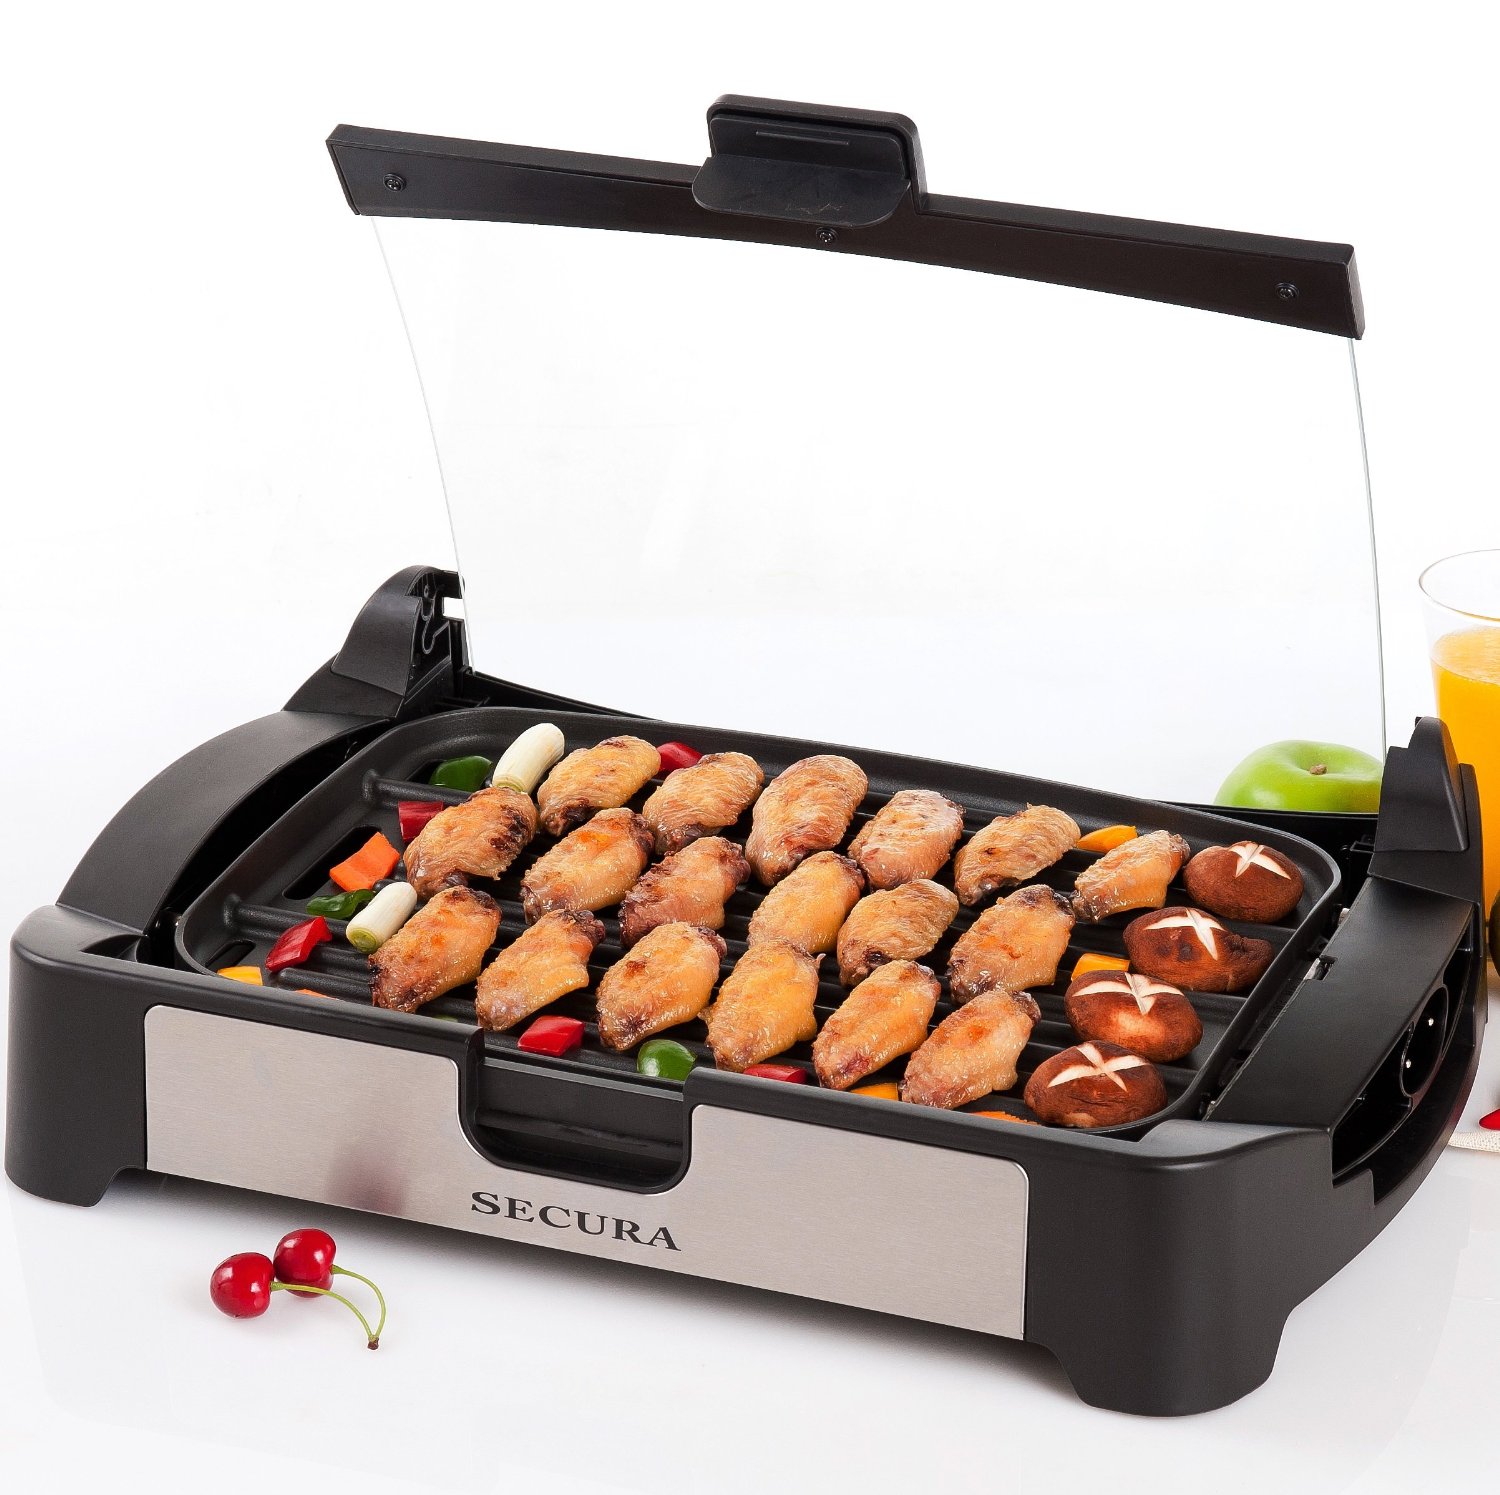 Secura 1700W Electric Reversible Grill Griddle with Glass Lid - The Secura